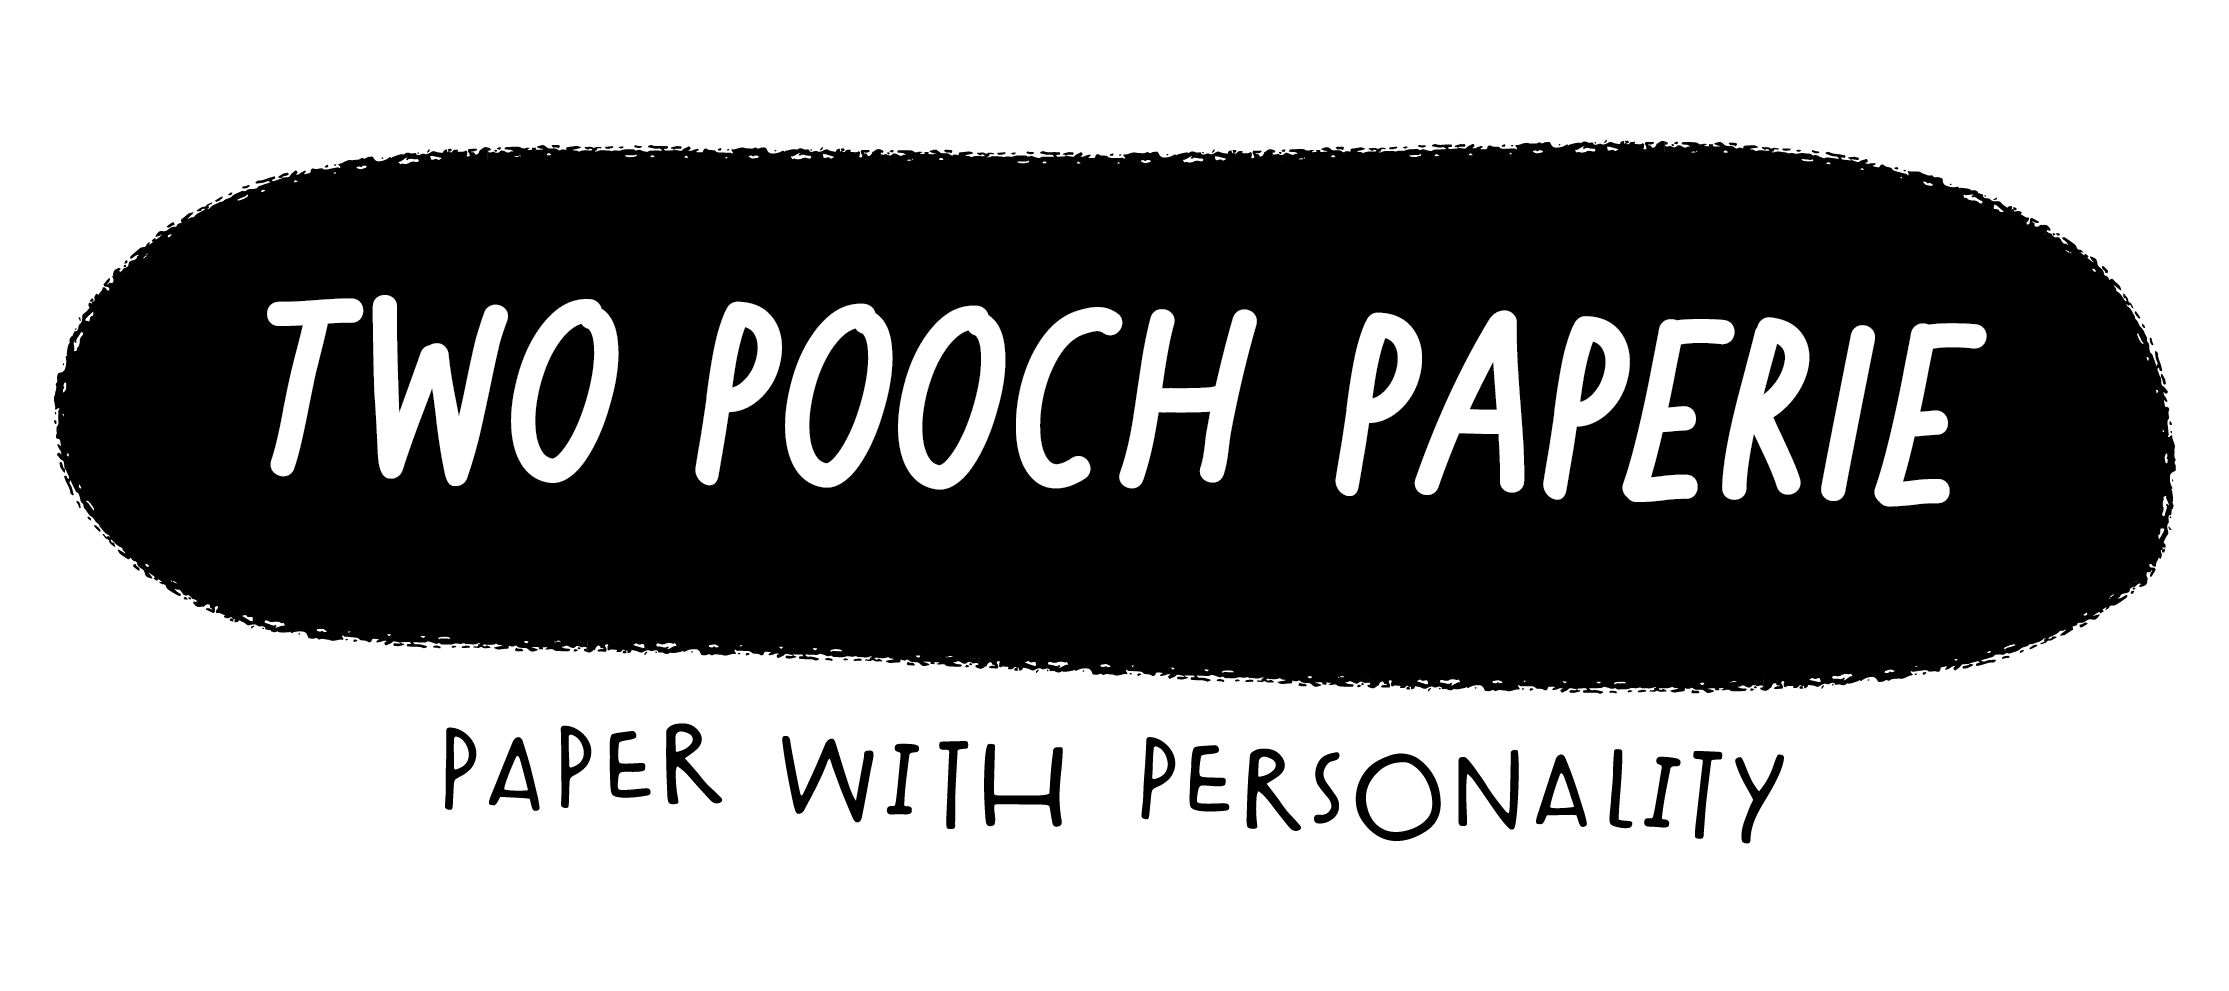 Two Pooch Paperie